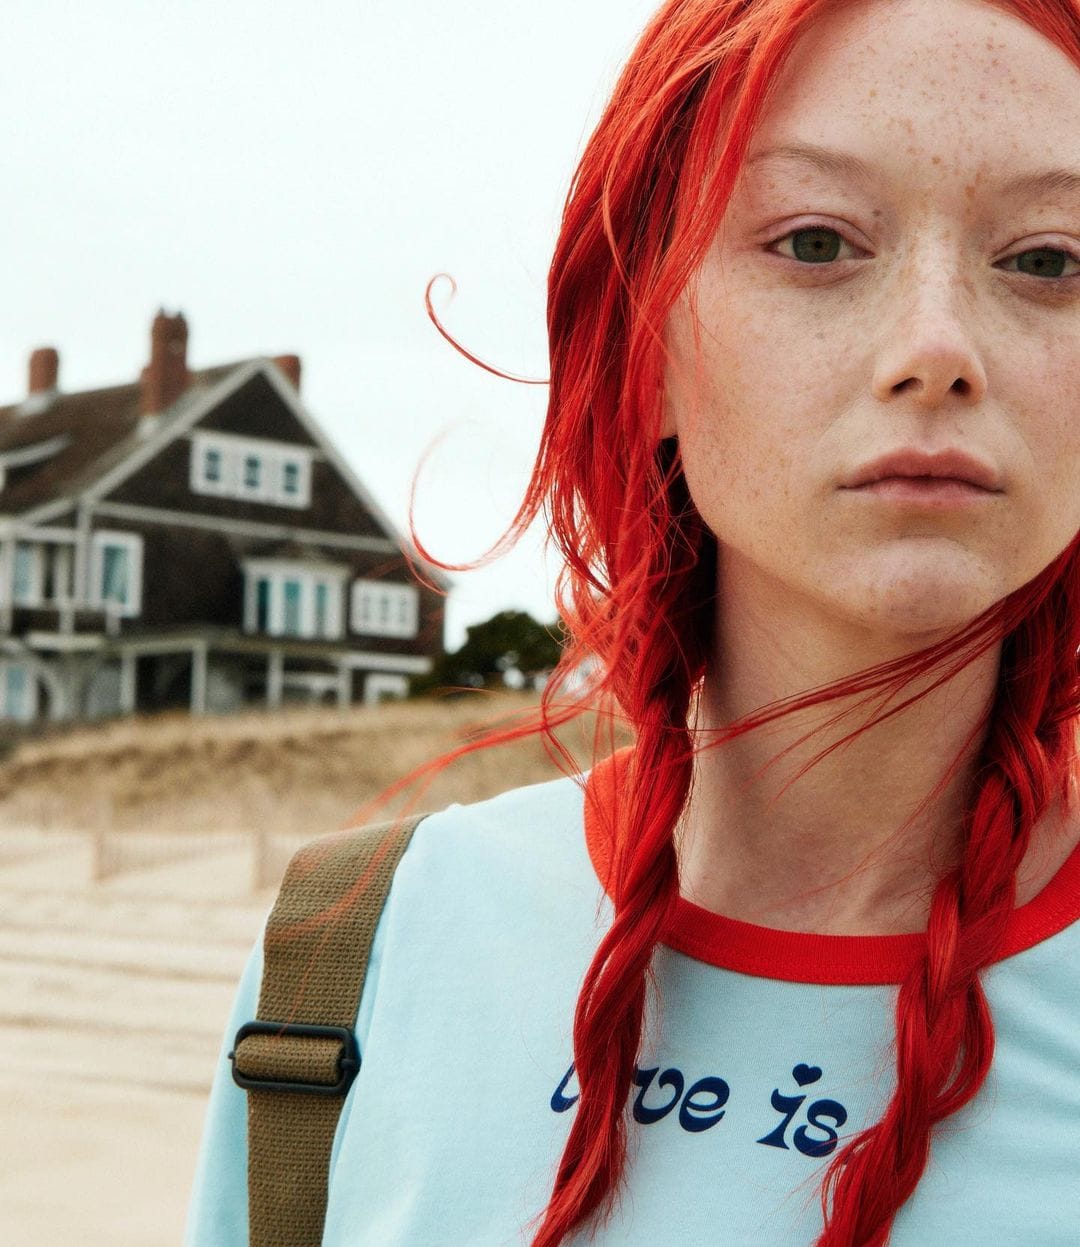 Heaven by Marc Jacobs 'Eternal Sunshine' Campaign | Hypebae